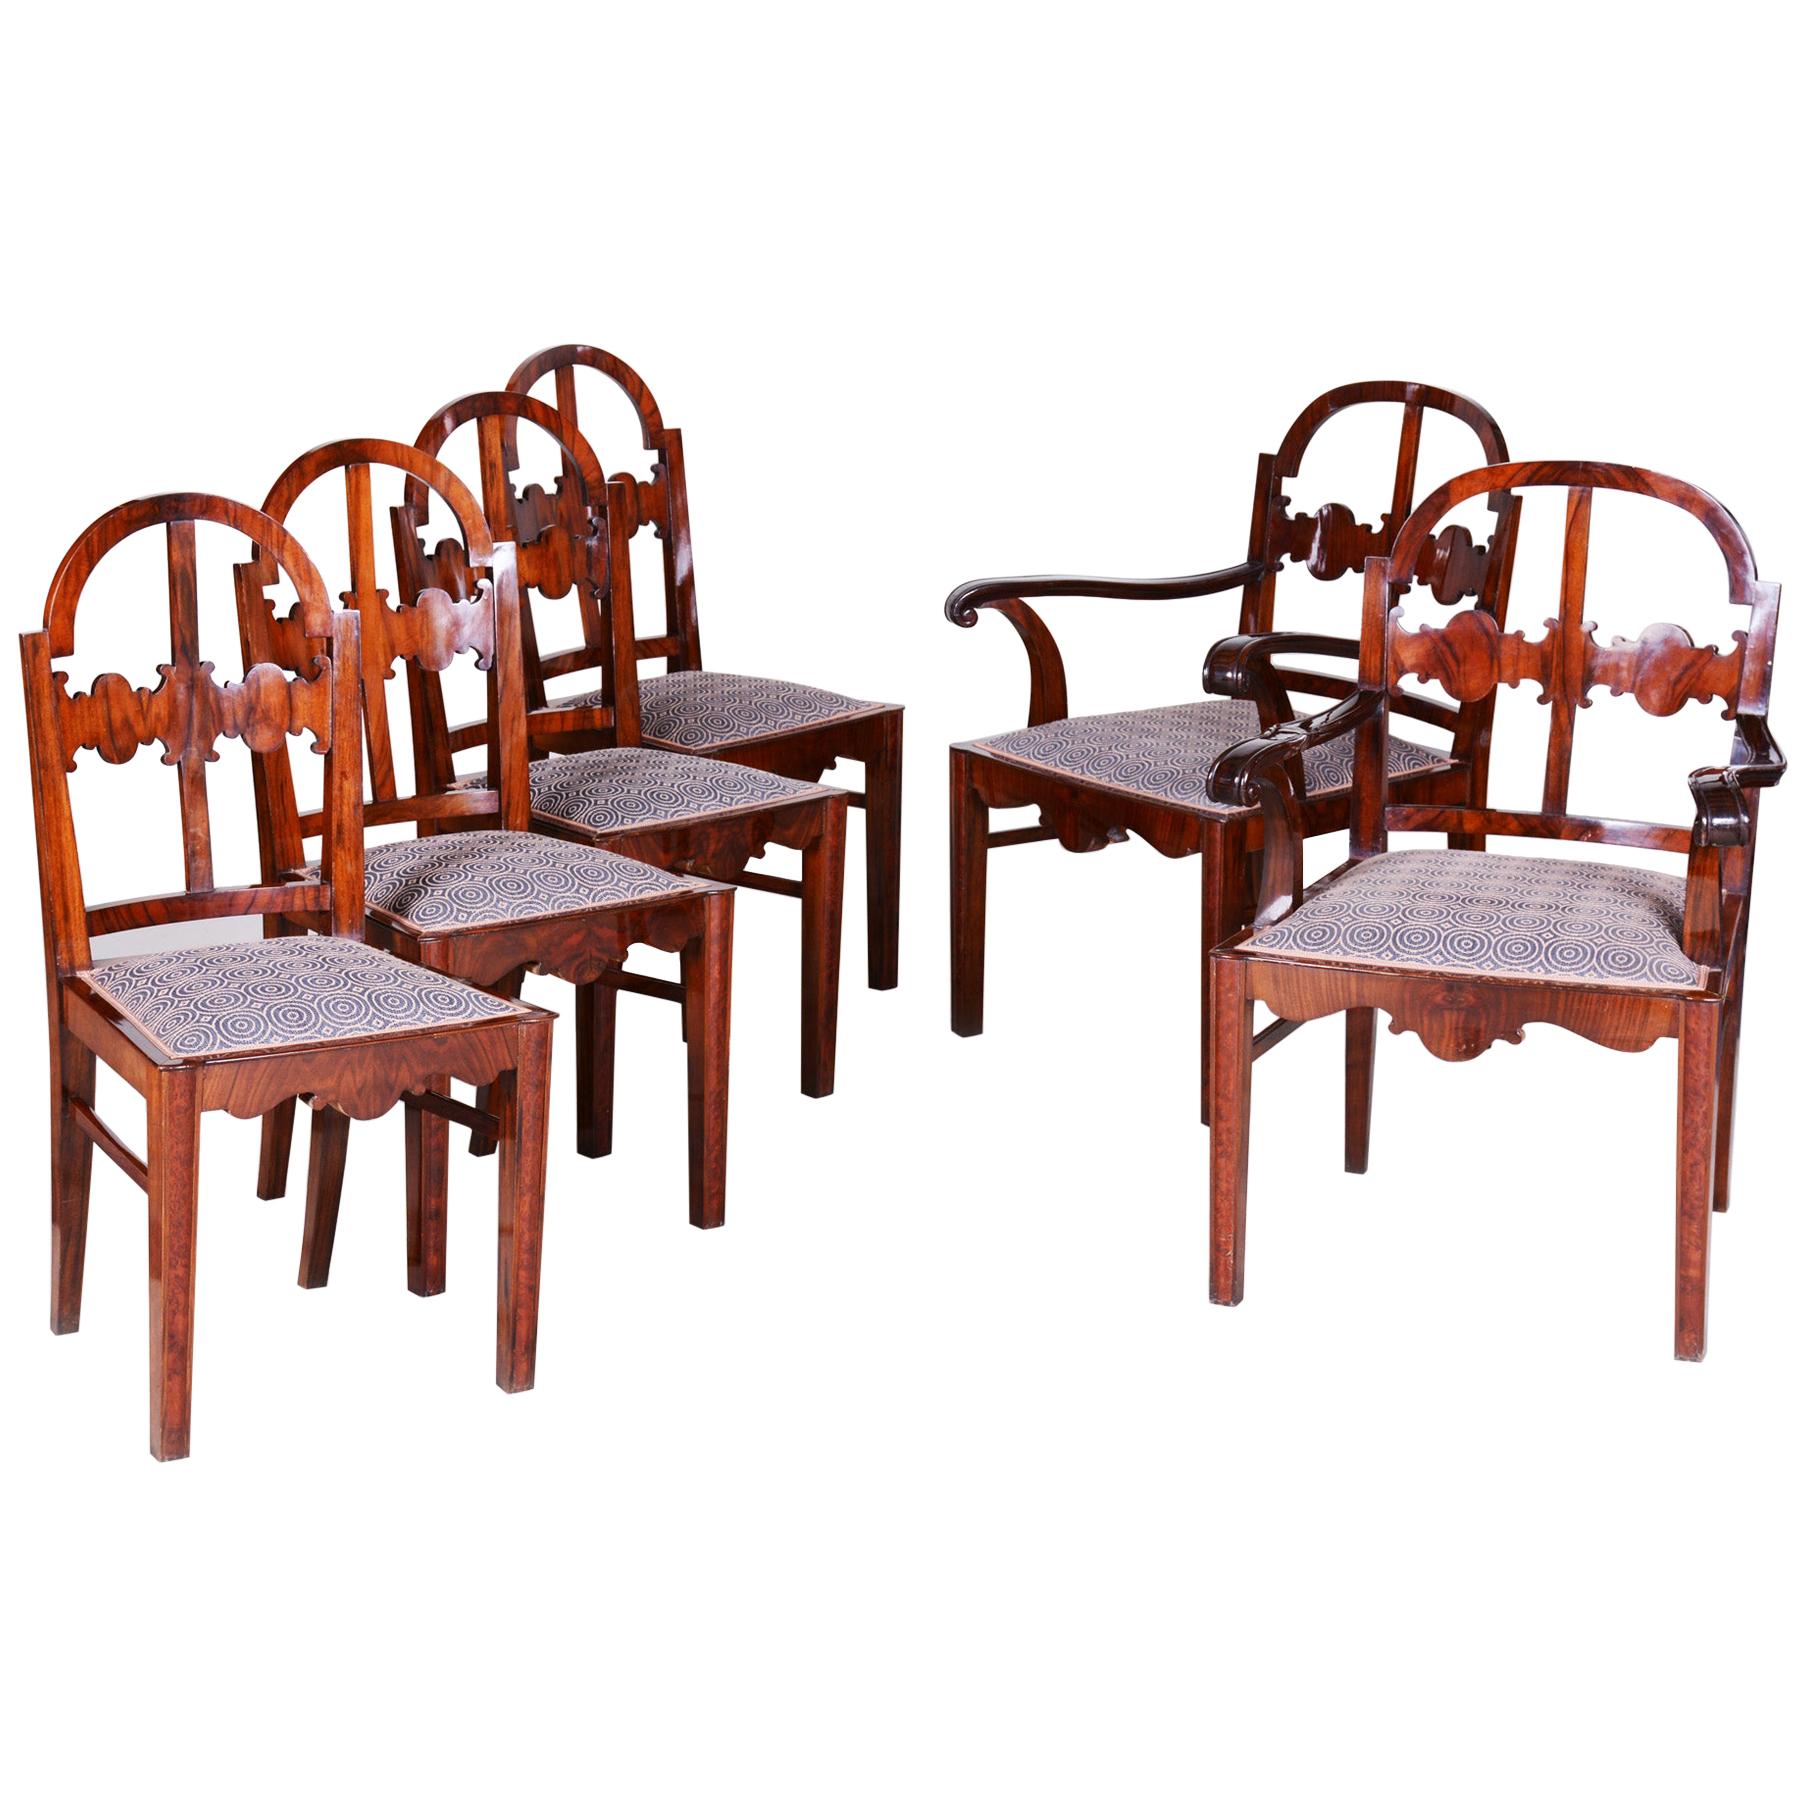 Walnut Art Deco Seating Set, 2 Armchairs and 4 Chairs, Shellac Polish, 1920s For Sale